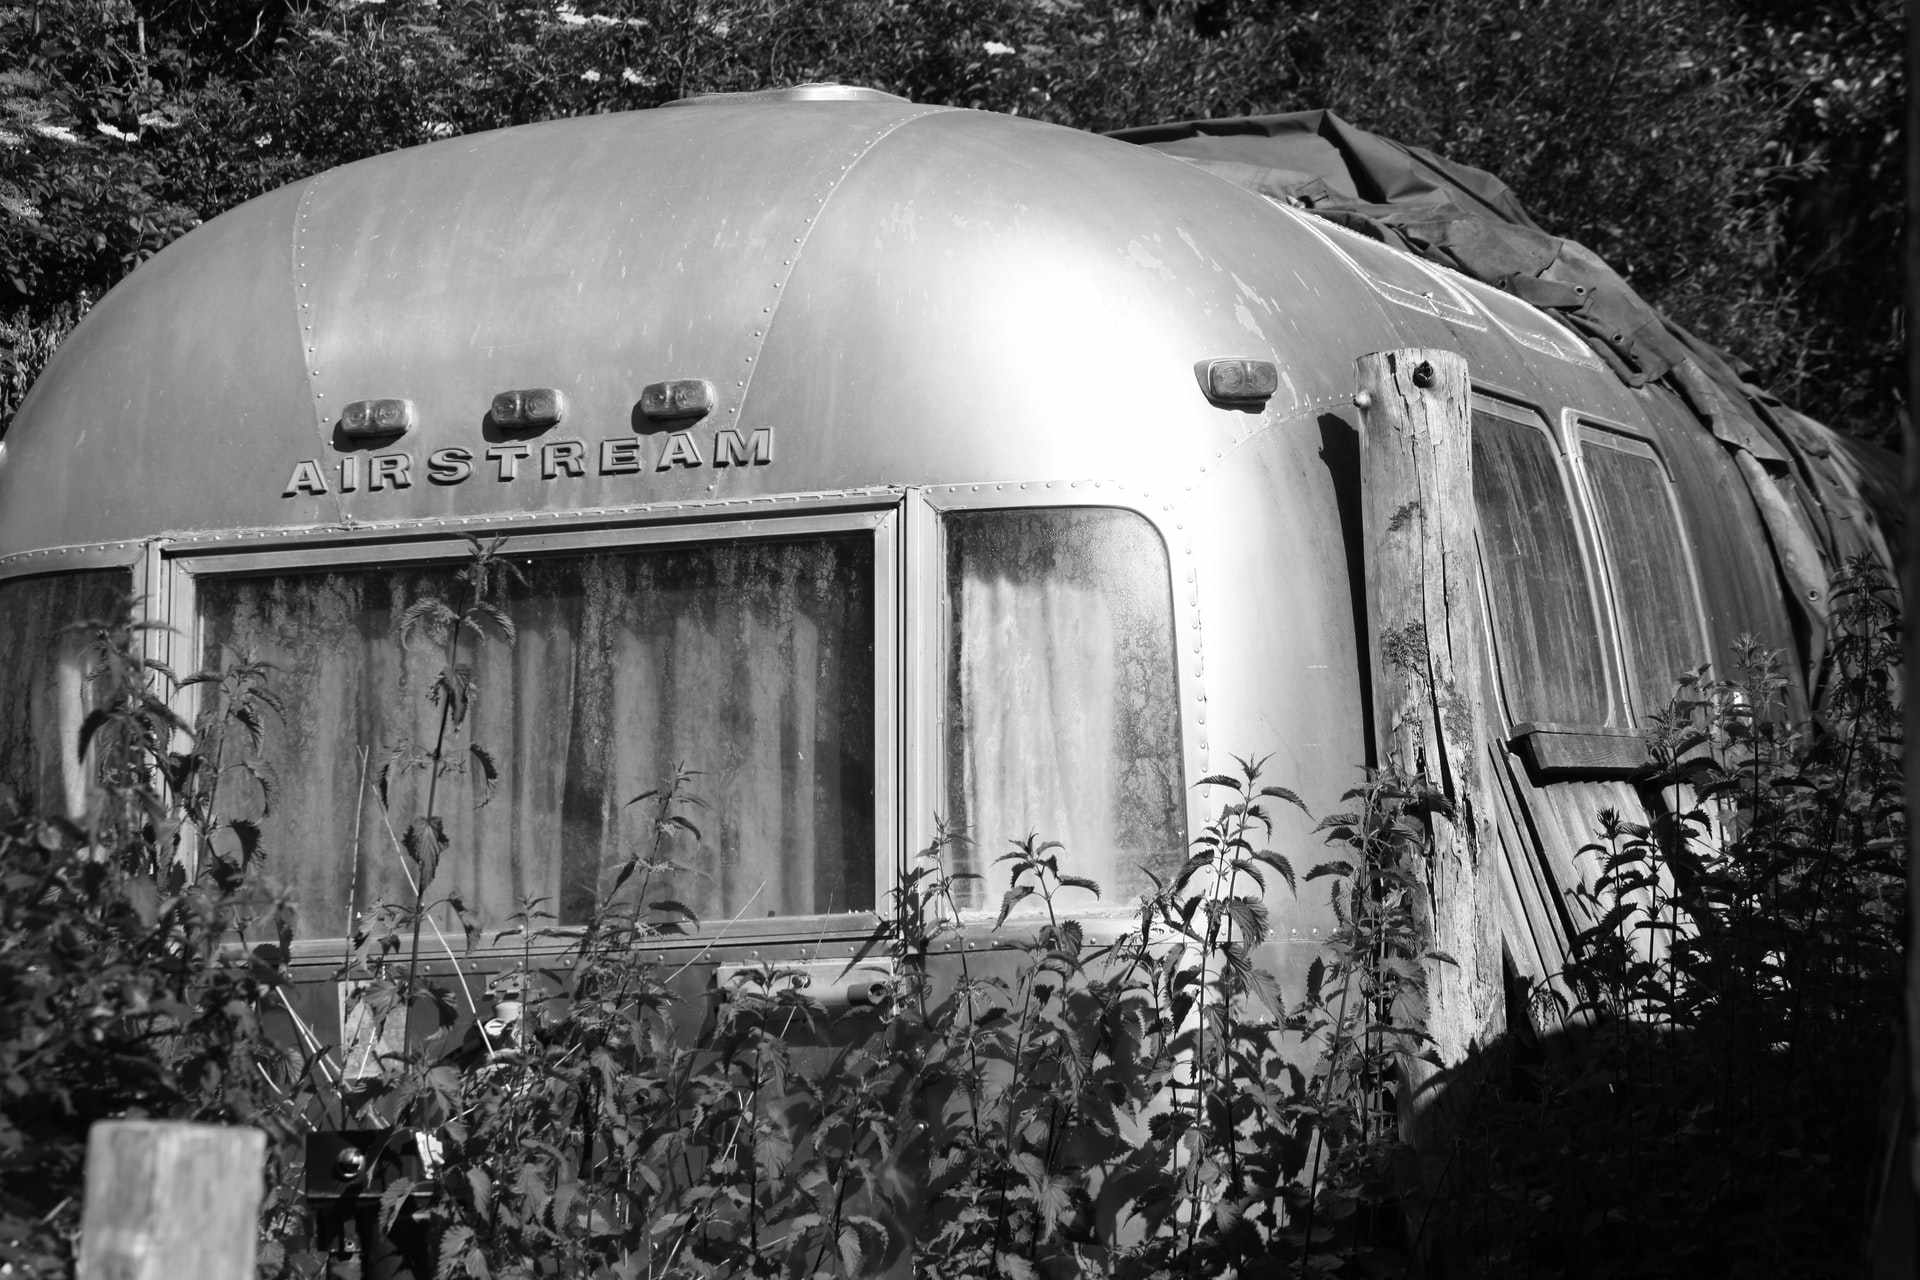 Classic RVs: The History of the Airstream